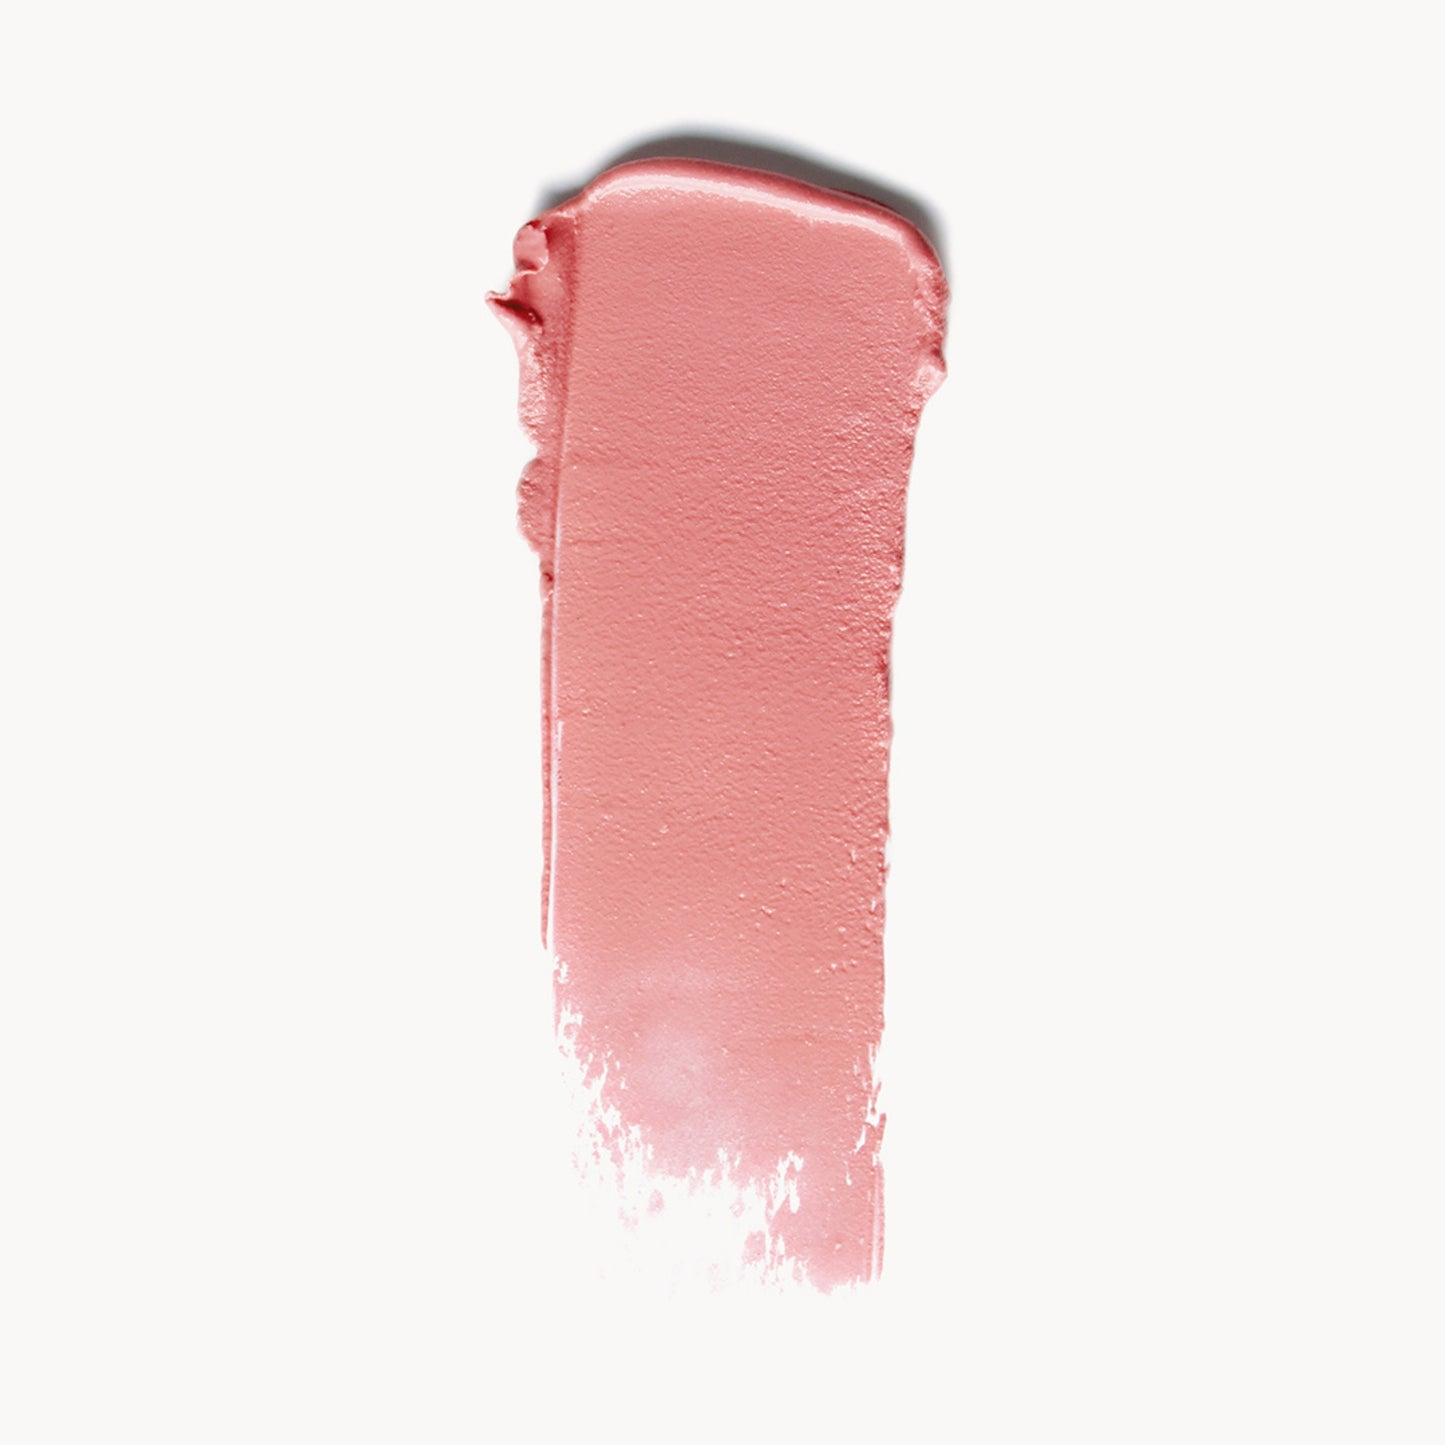 A wipe of cool pink cream blush on a white background